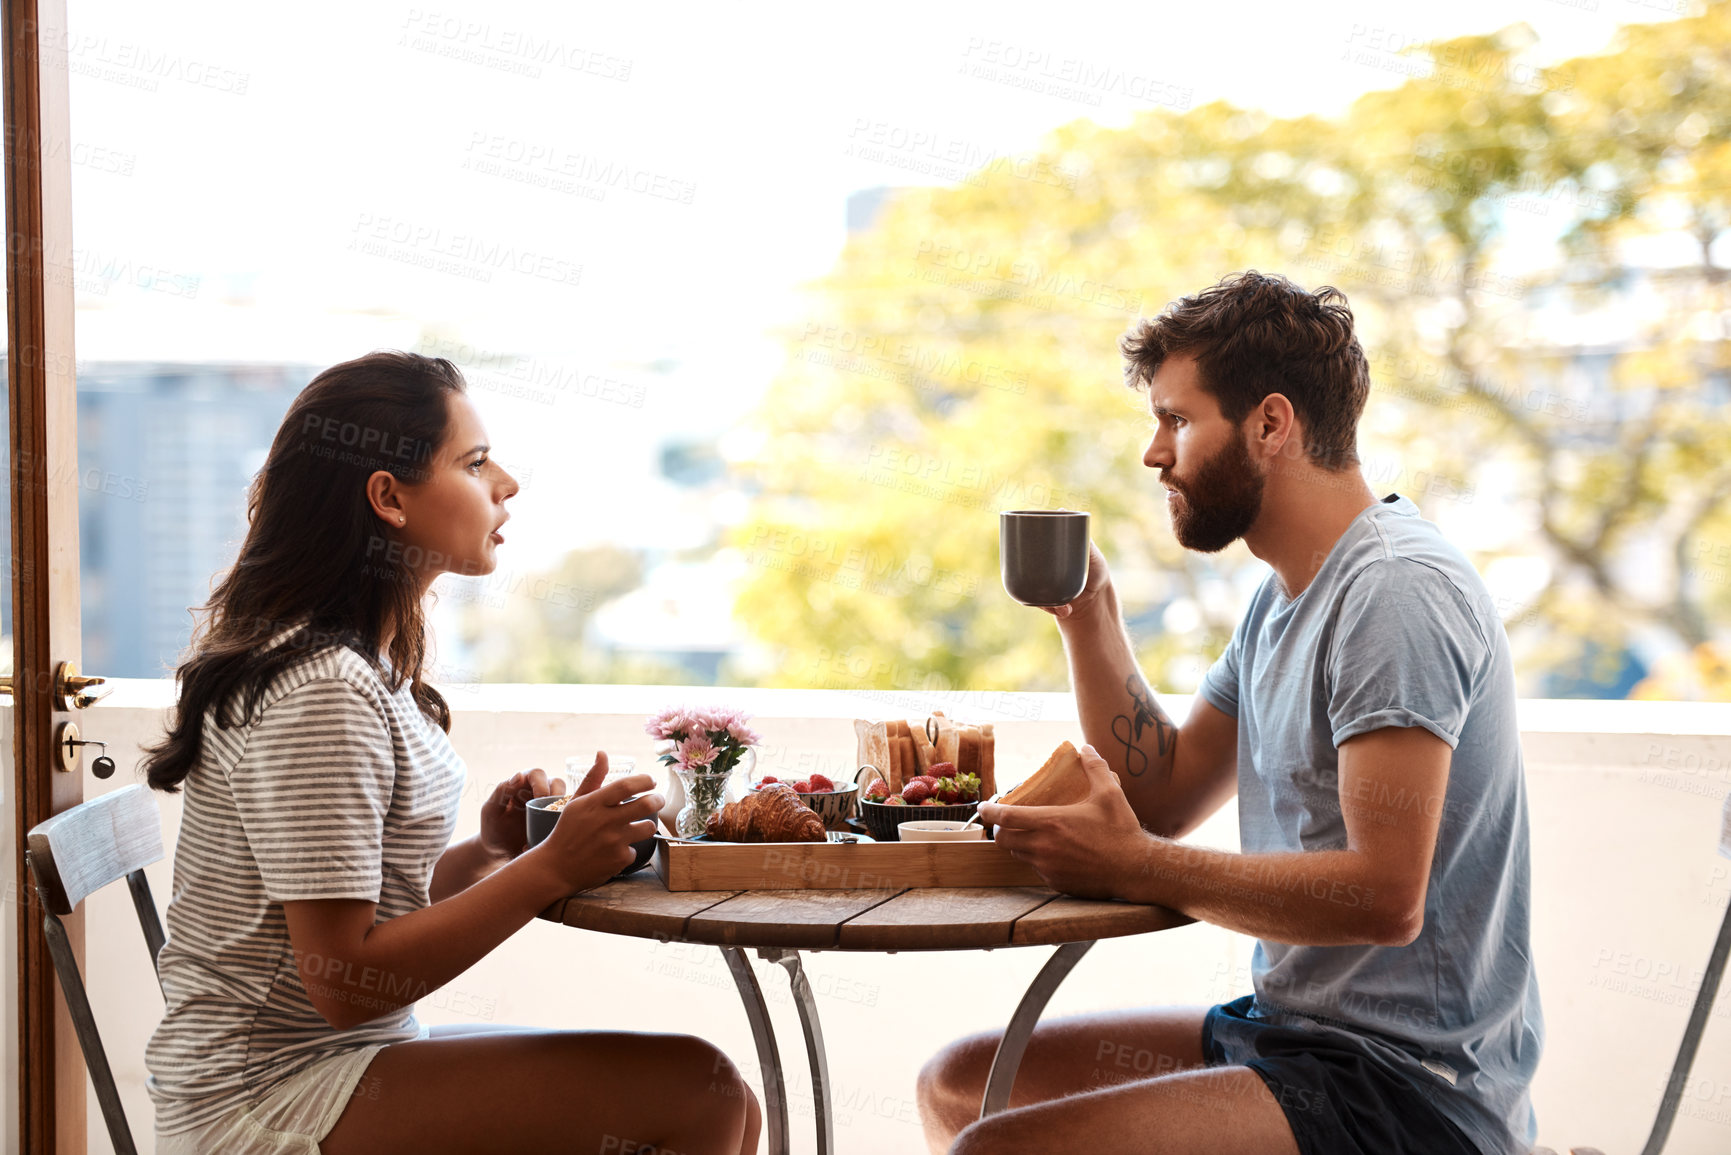 Buy stock photo Breakfast food, home and couple argue, fight or angry over relationship problem, mistake or frustrated on apartment balcony. Divorce risk, marriage fail and people in morning conflict during brunch